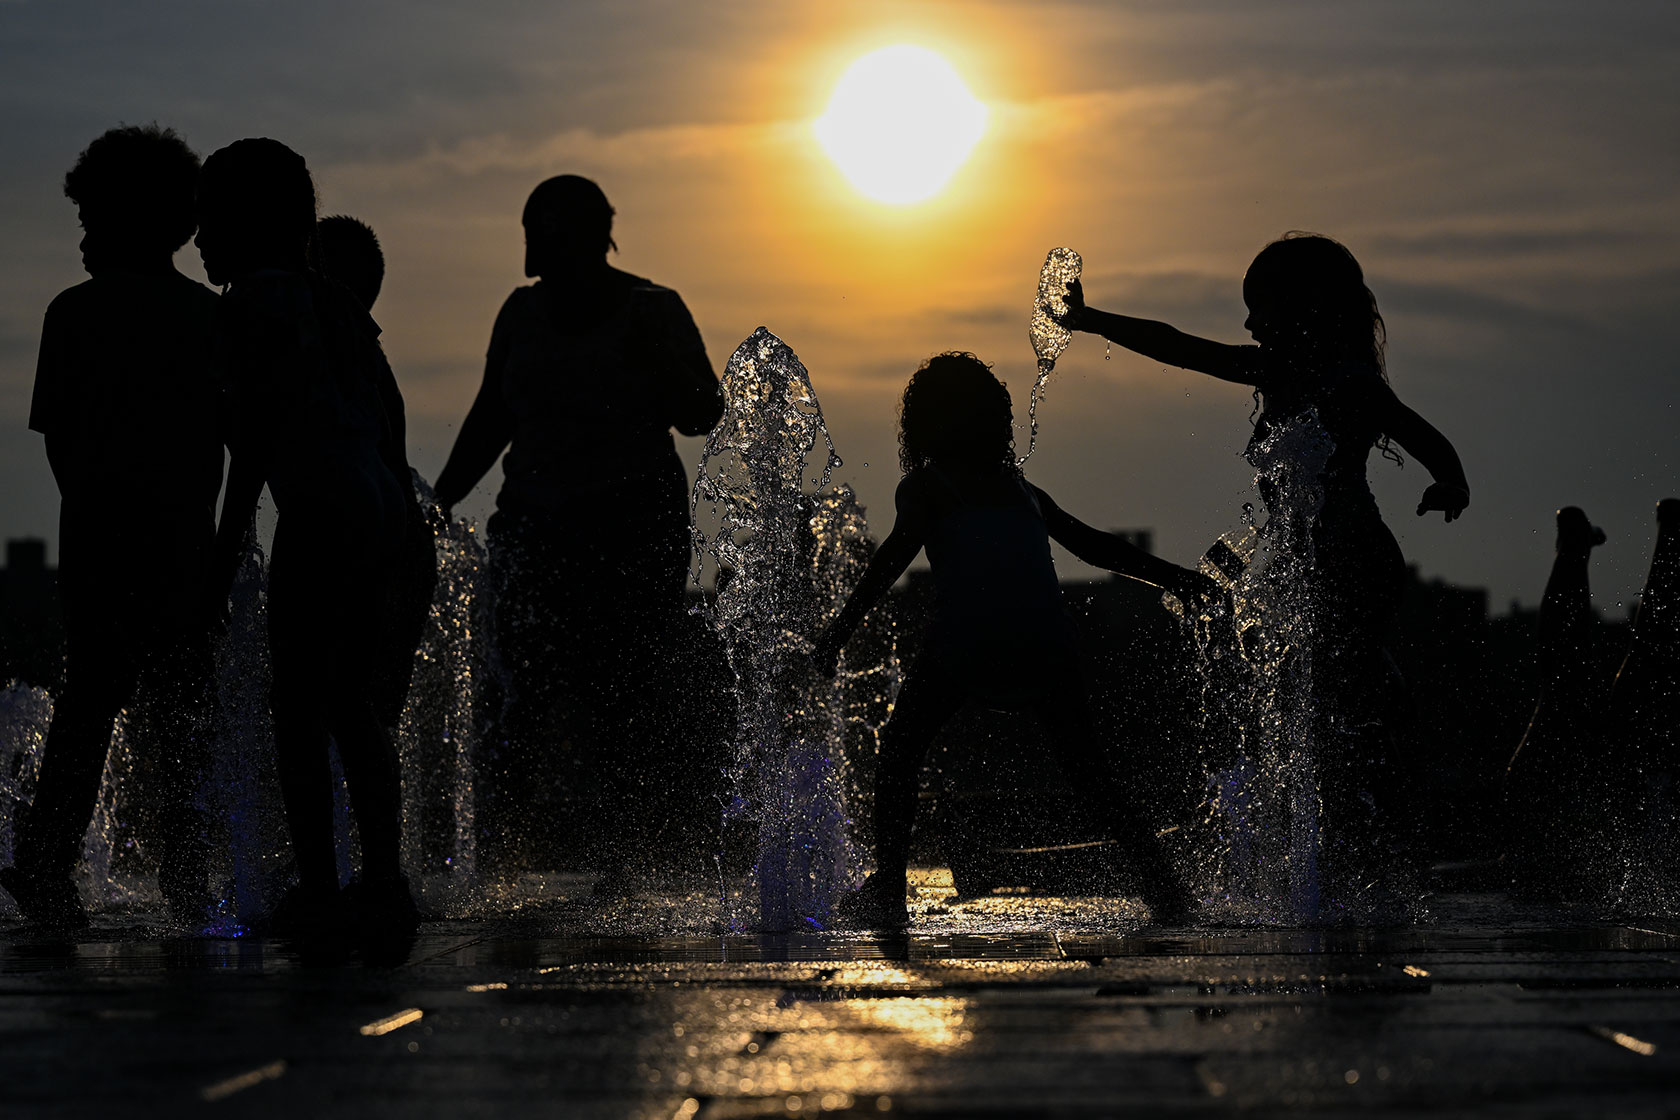 Young children cool off by playing in a fountain in Brooklyn, New York’s Domino Park.